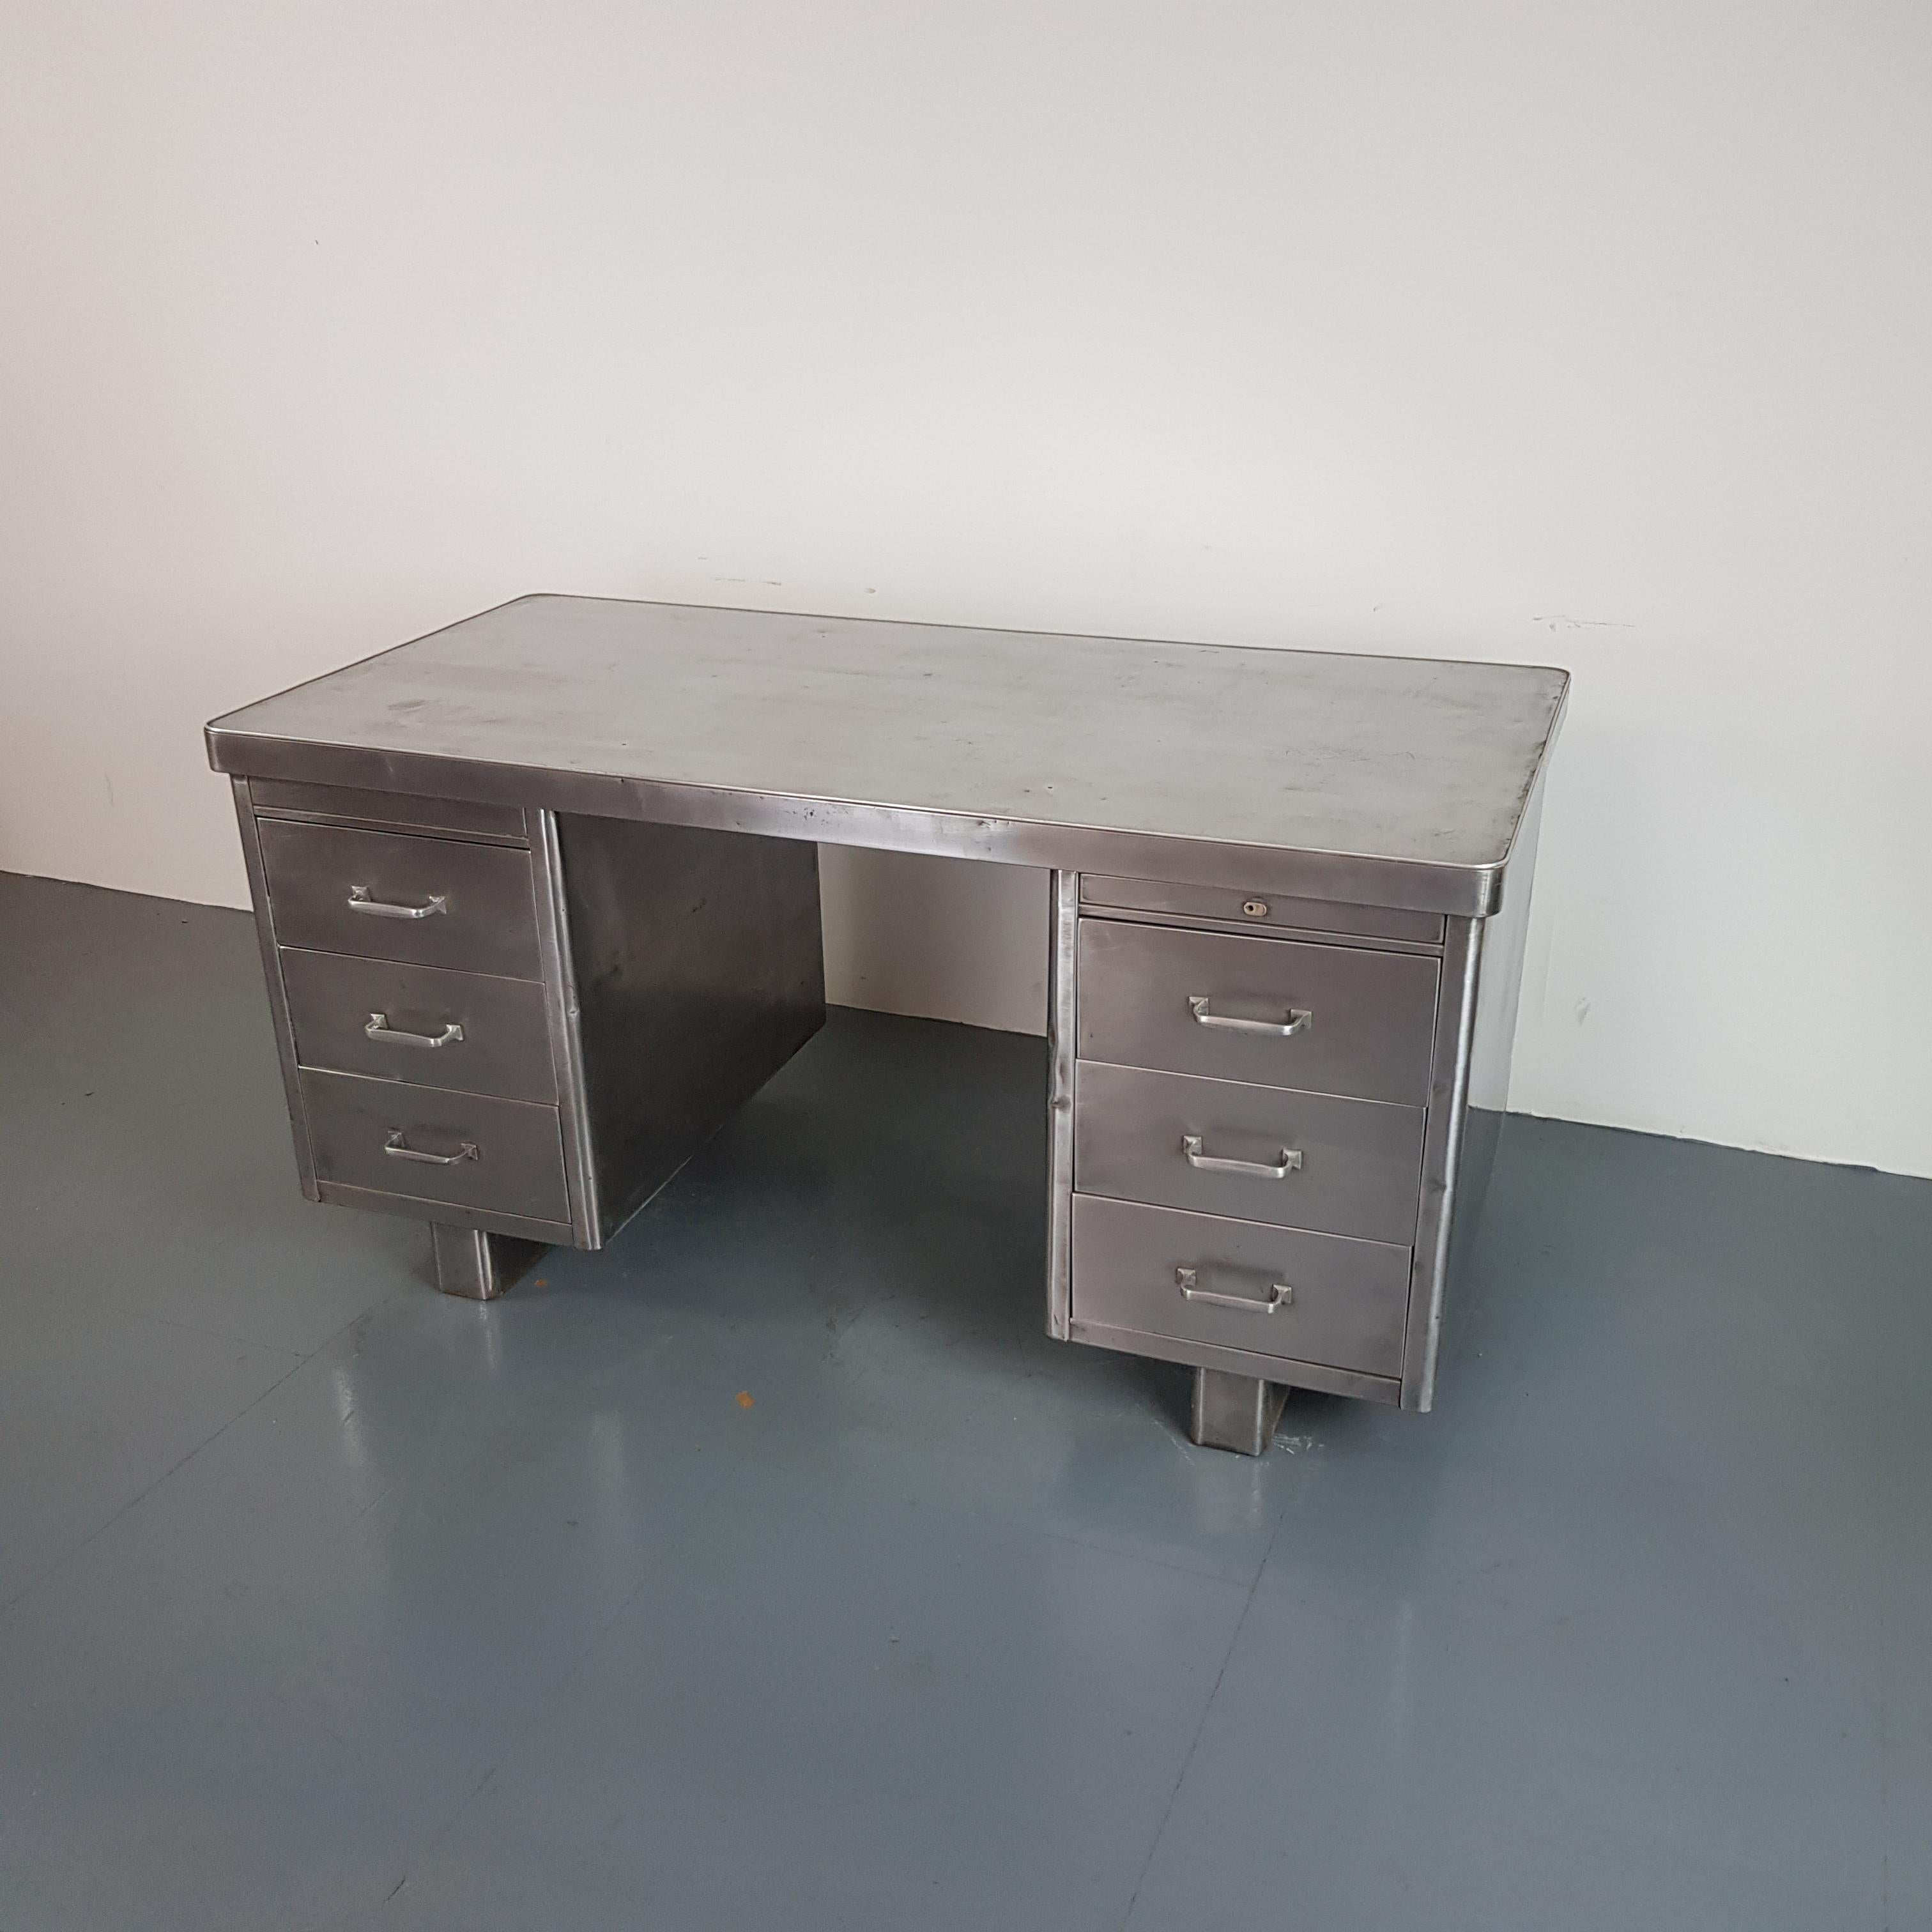 Vintage Industrial 1930s Double Pedestal Polished Steel Desk In Good Condition For Sale In Lewes, East Sussex